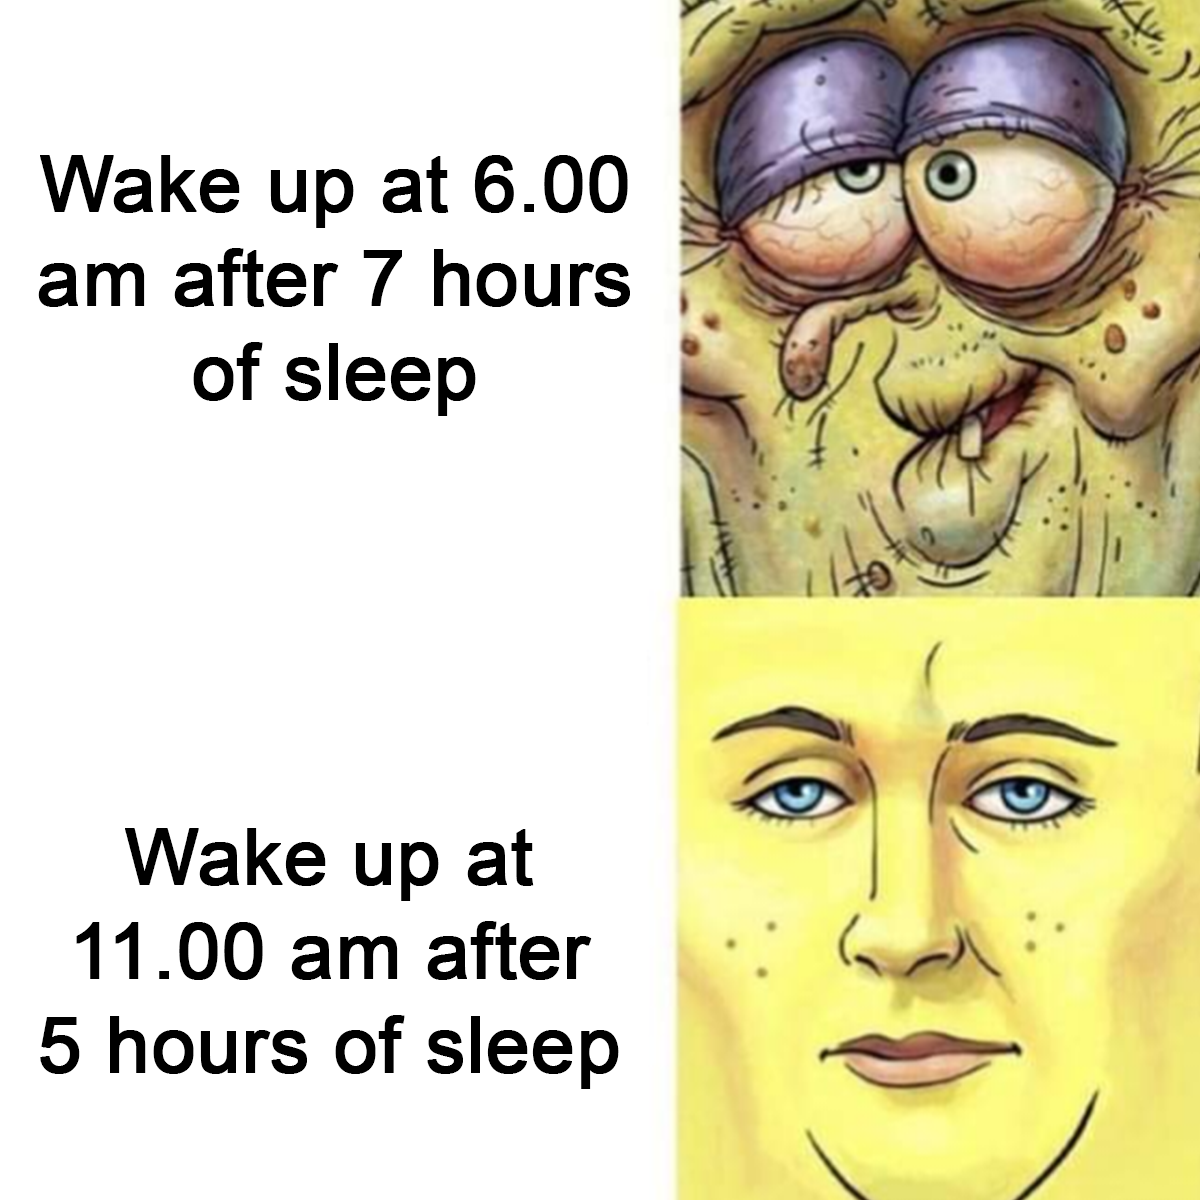 monday morning randomness - Internet meme - Wake up at 6.00 am after 7 hours of sleep Wake up at 11.00 am after 5 hours of sleep 2 "